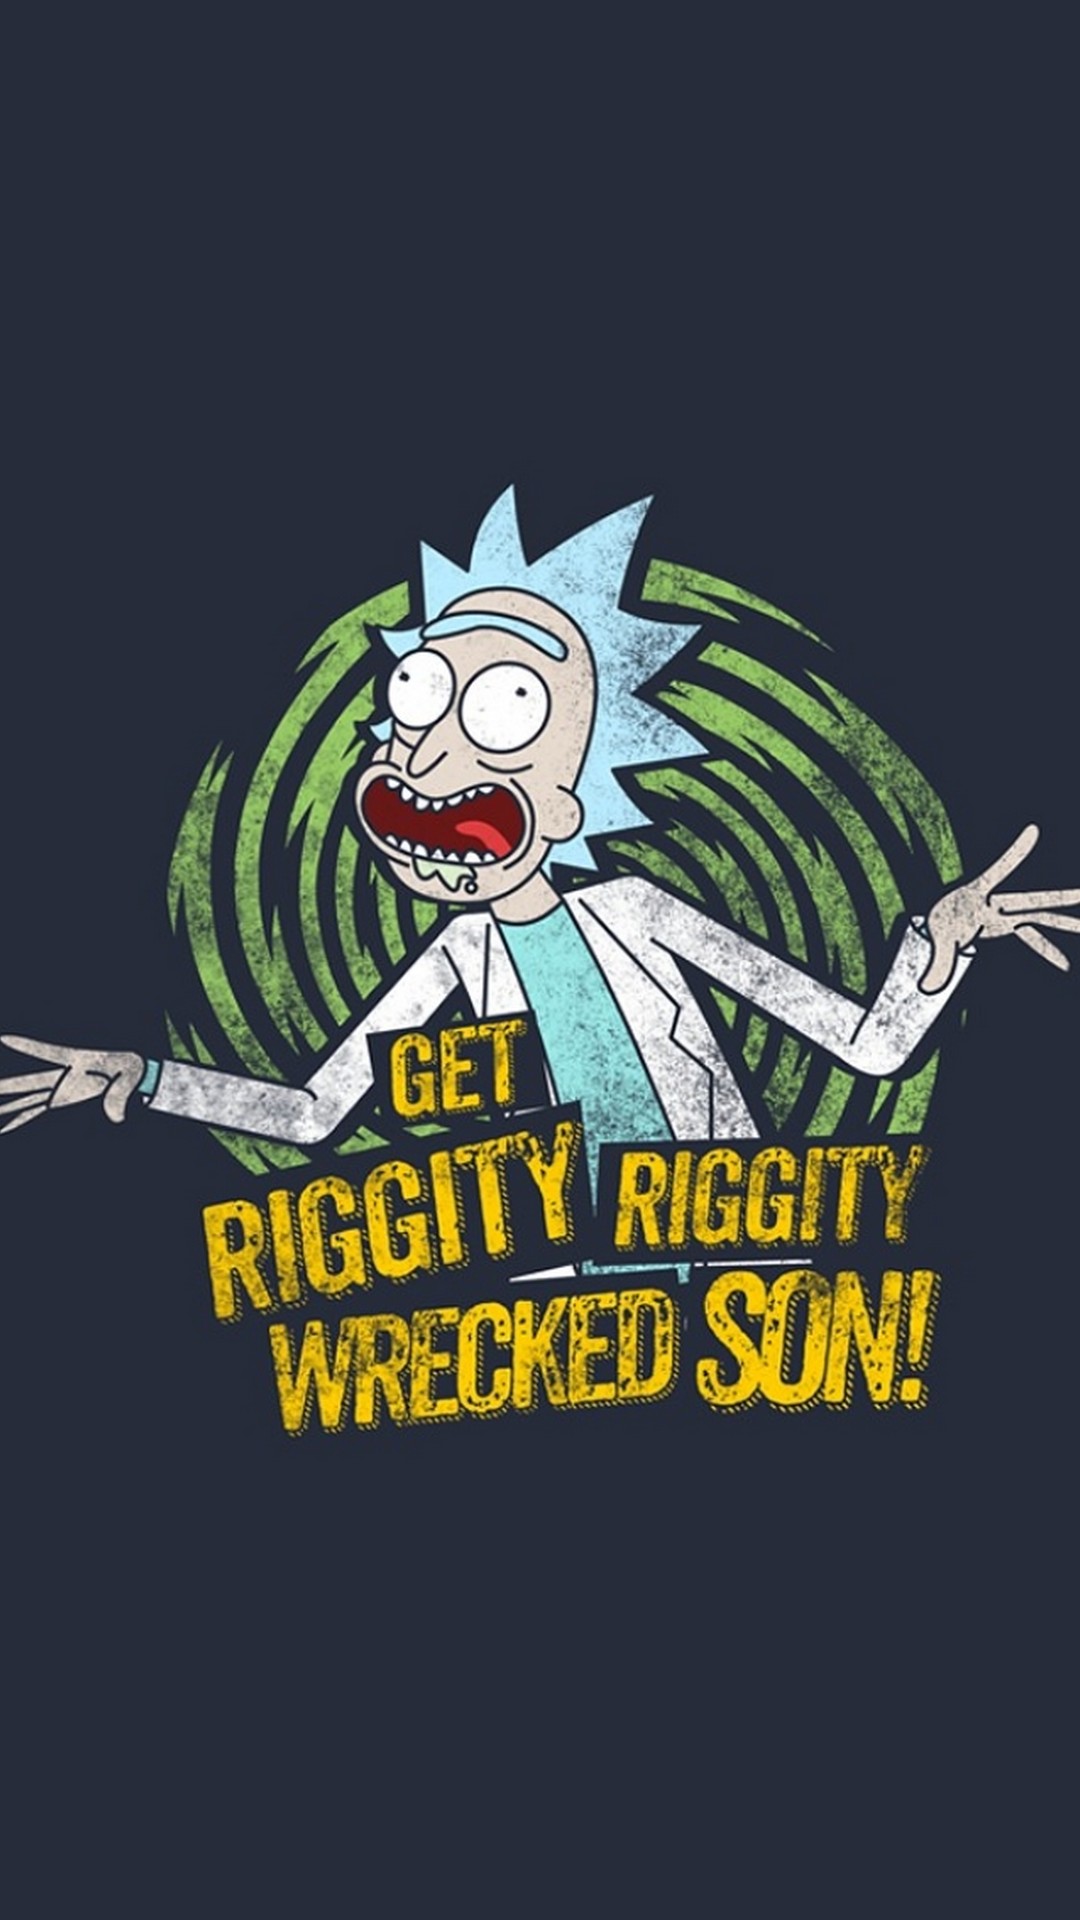 Rick and Morty iPhone Wallpapers with image resolution 1080x1920 pixel. You can use this wallpaper as background for your desktop Computer Screensavers, Android or iPhone smartphones